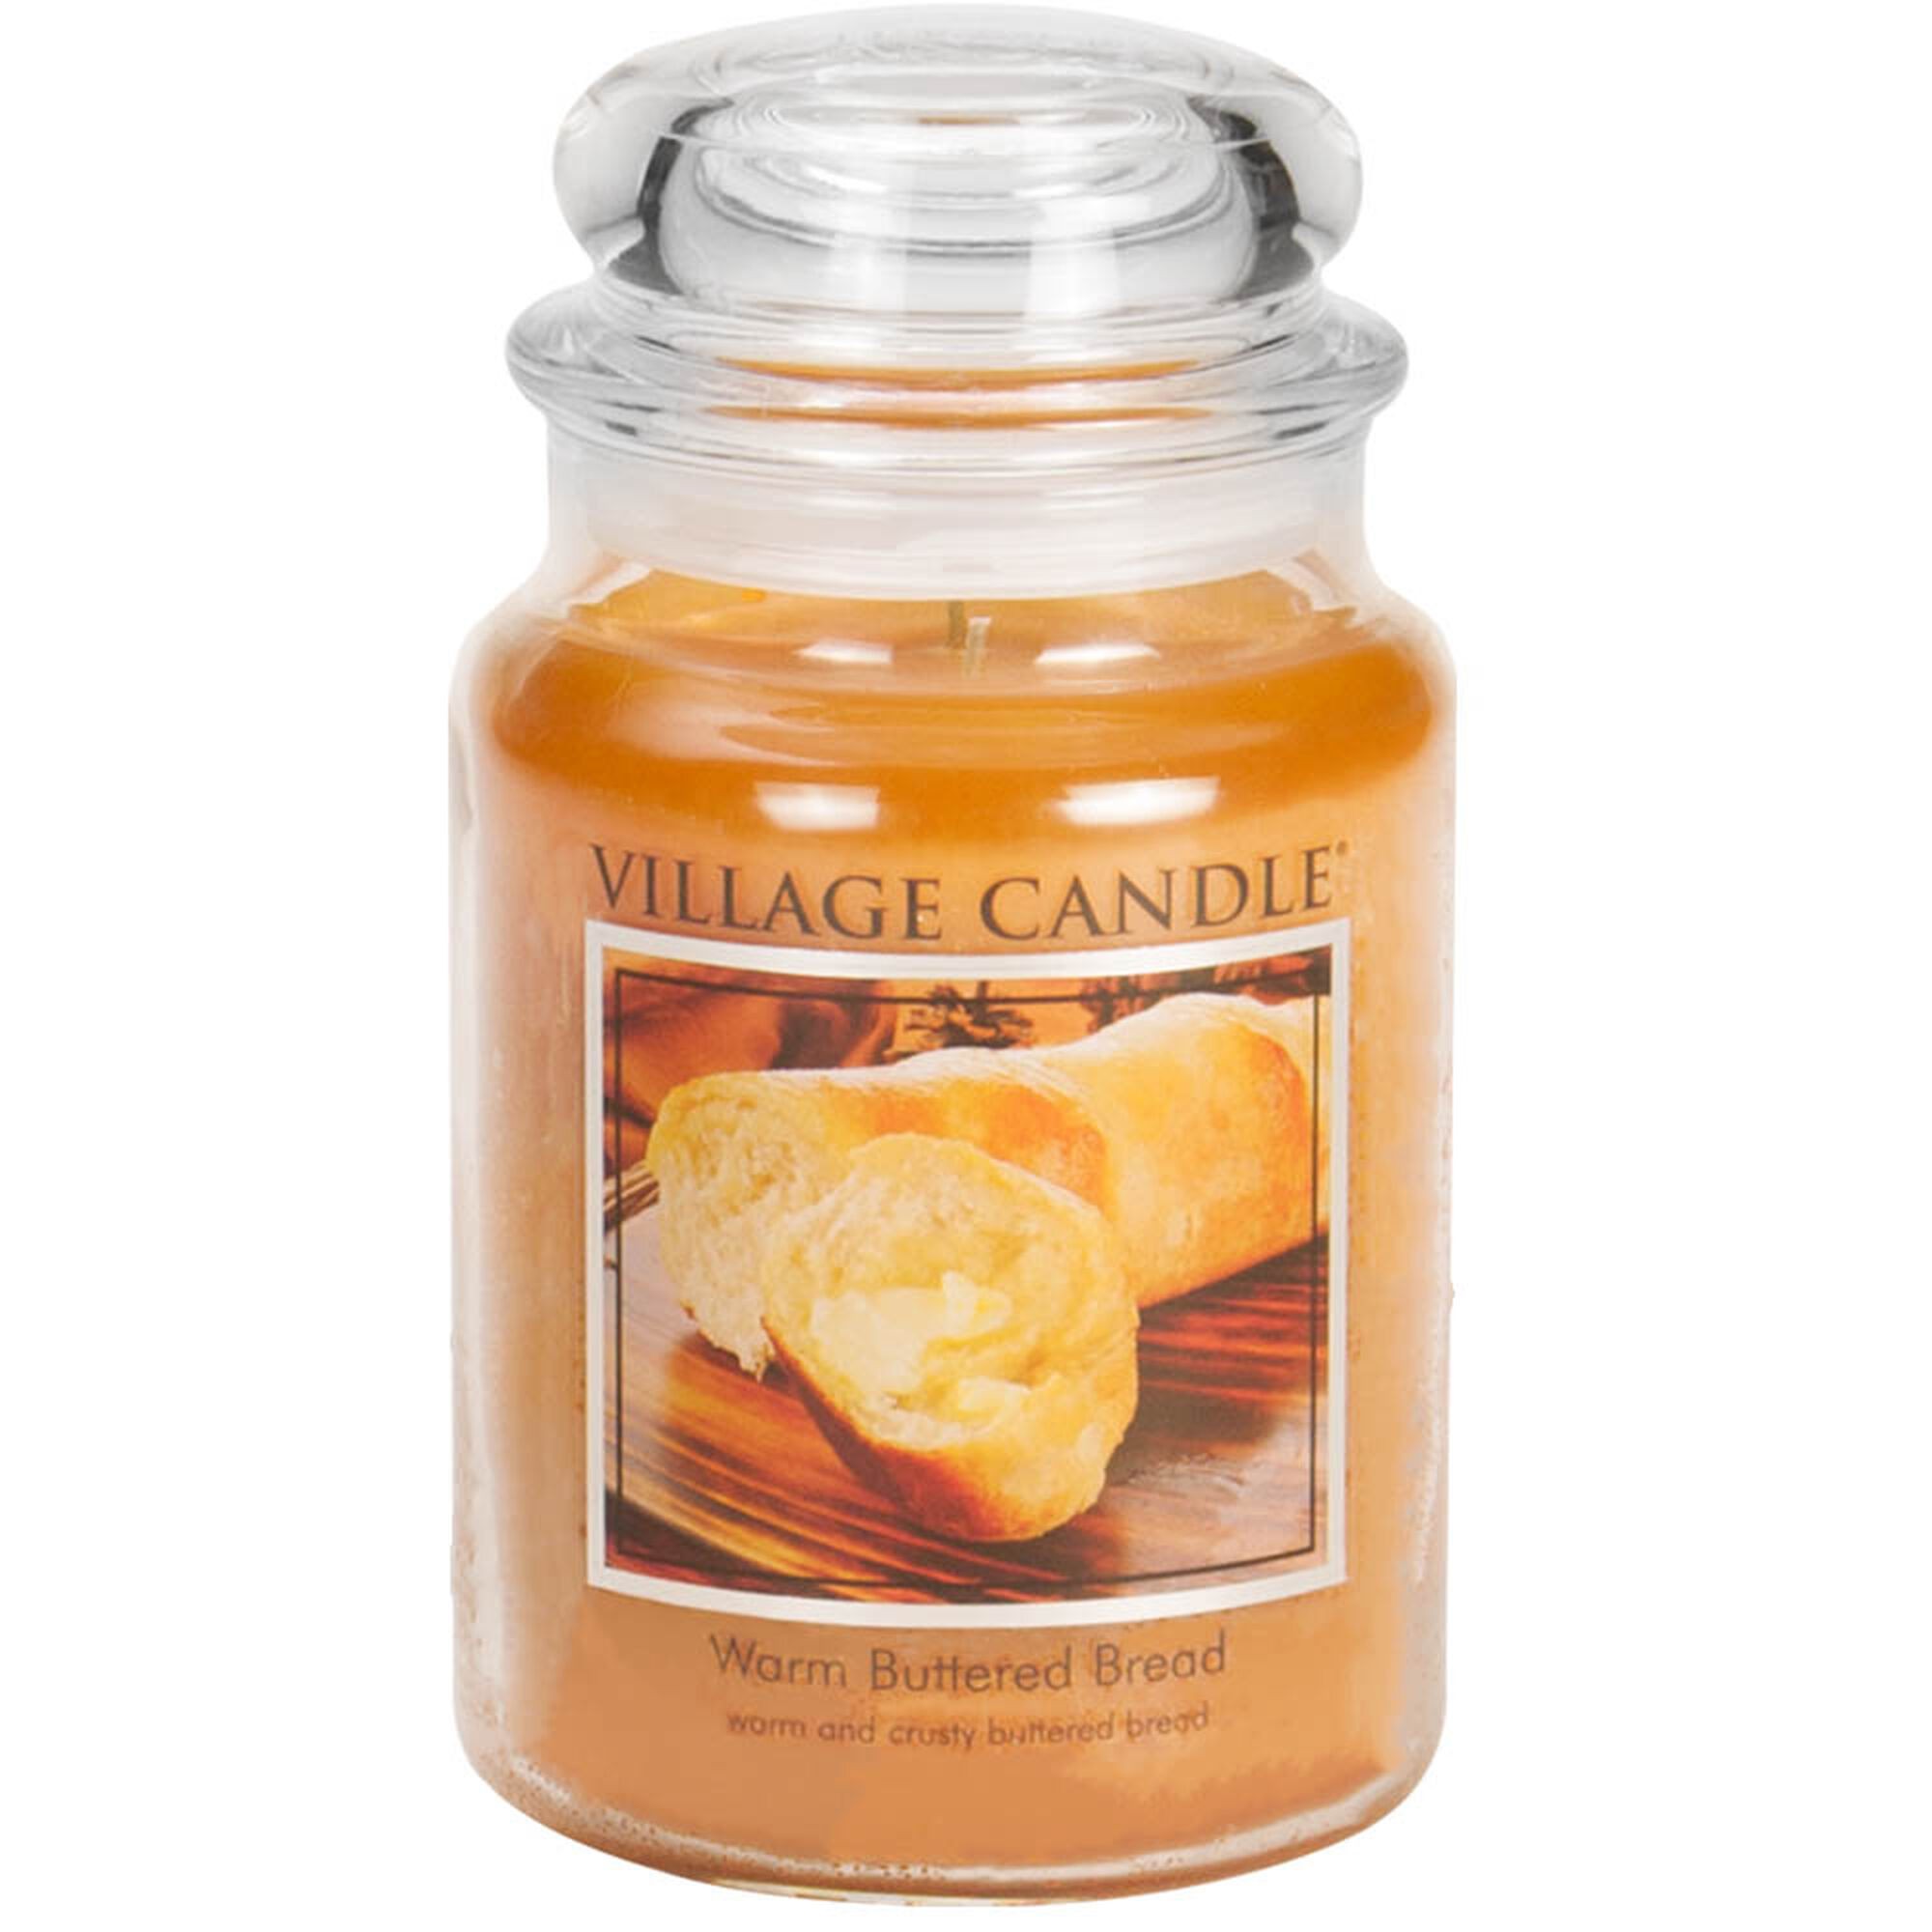 Village Candle Warm Buttered Bread Large Jar Glass